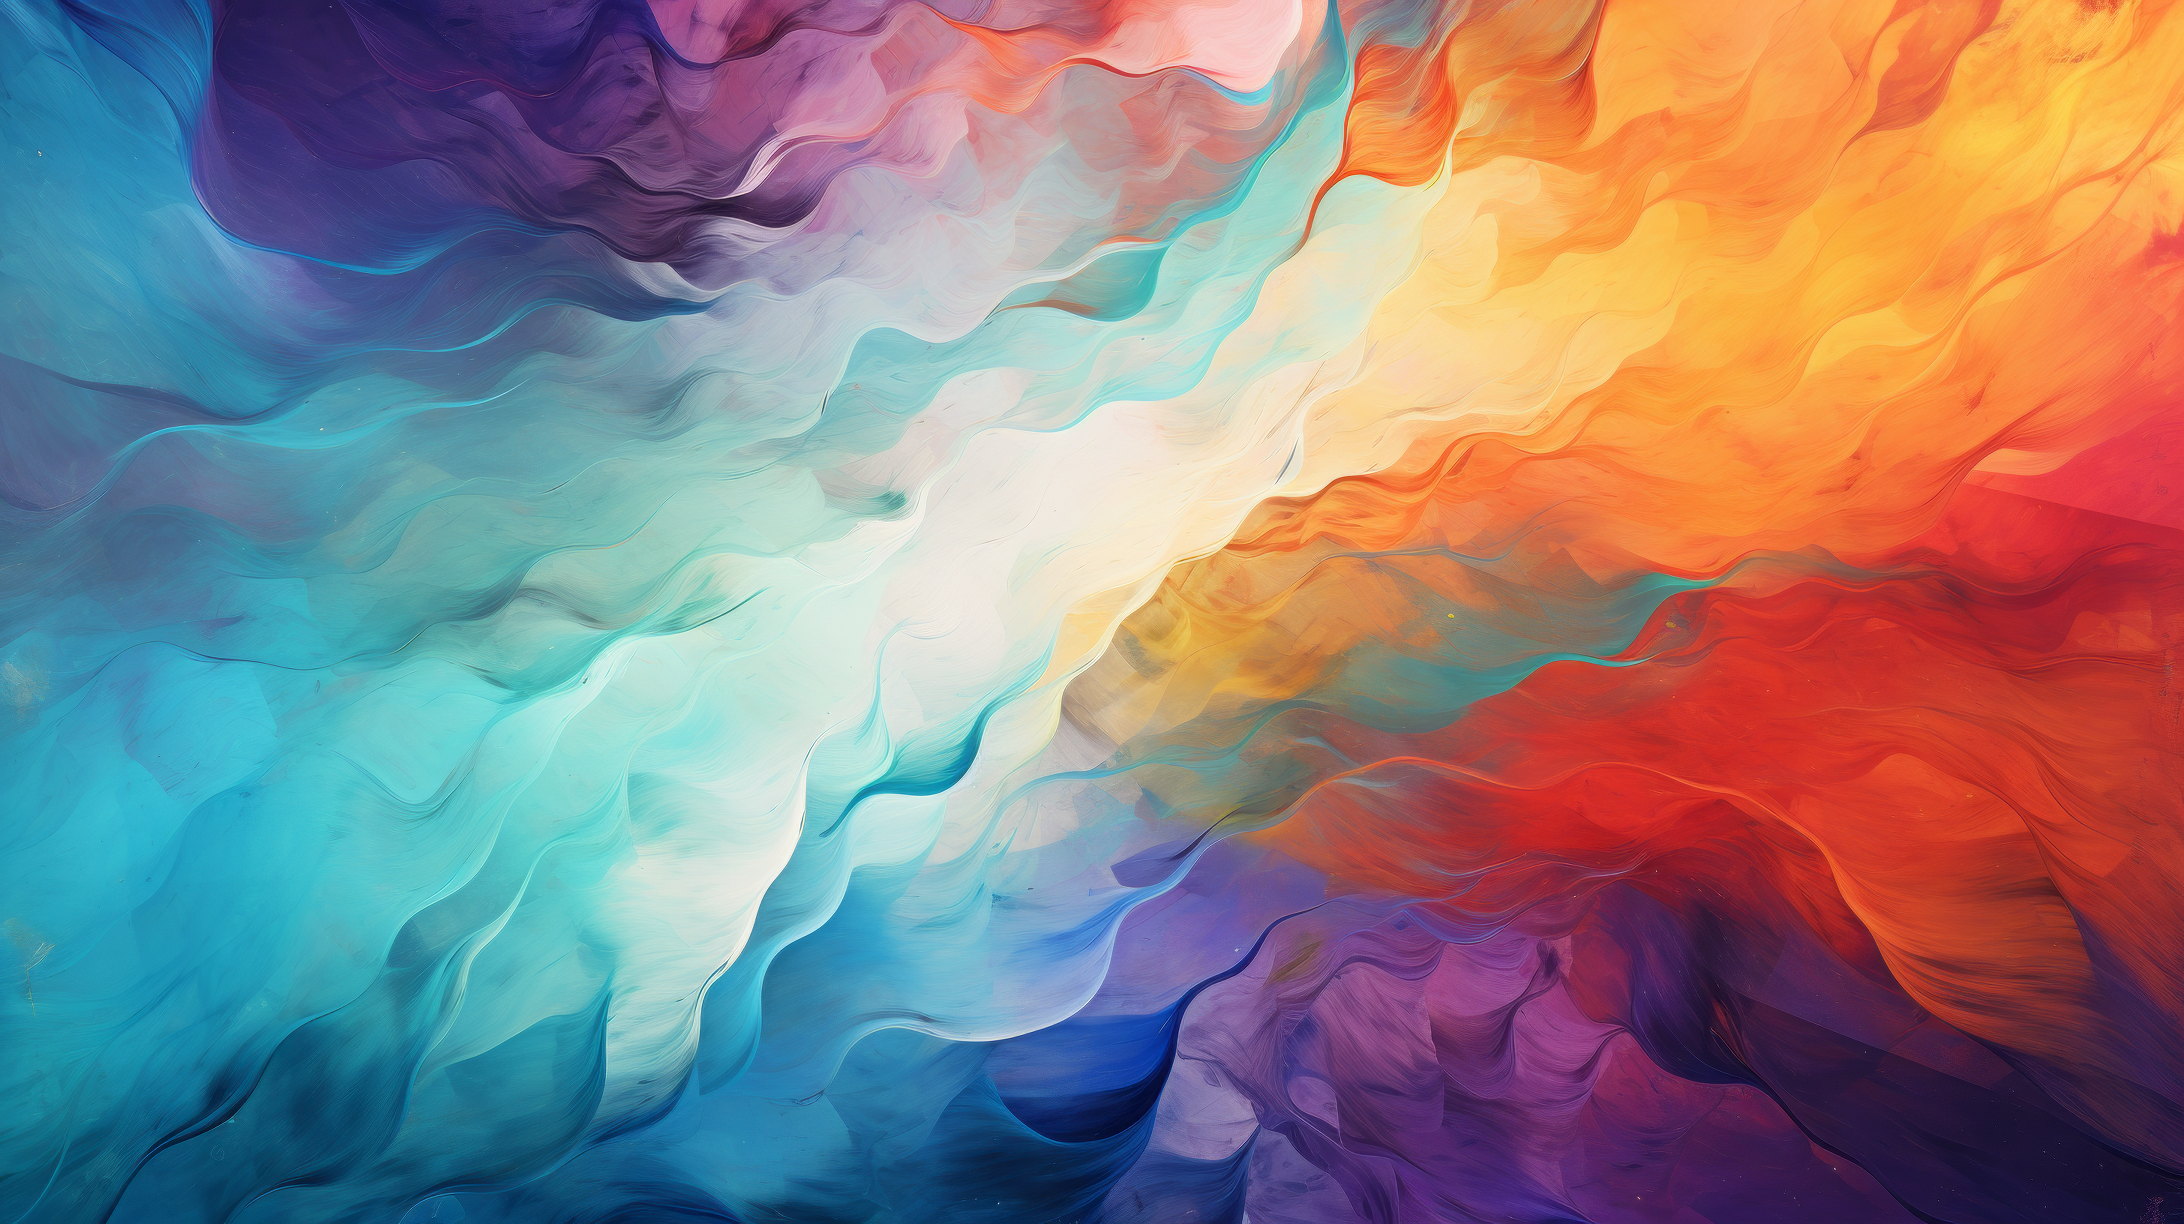 HD desktop wallpaper featuring a vibrant, abstract color palette with flowing hues of blue, purple, and orange.